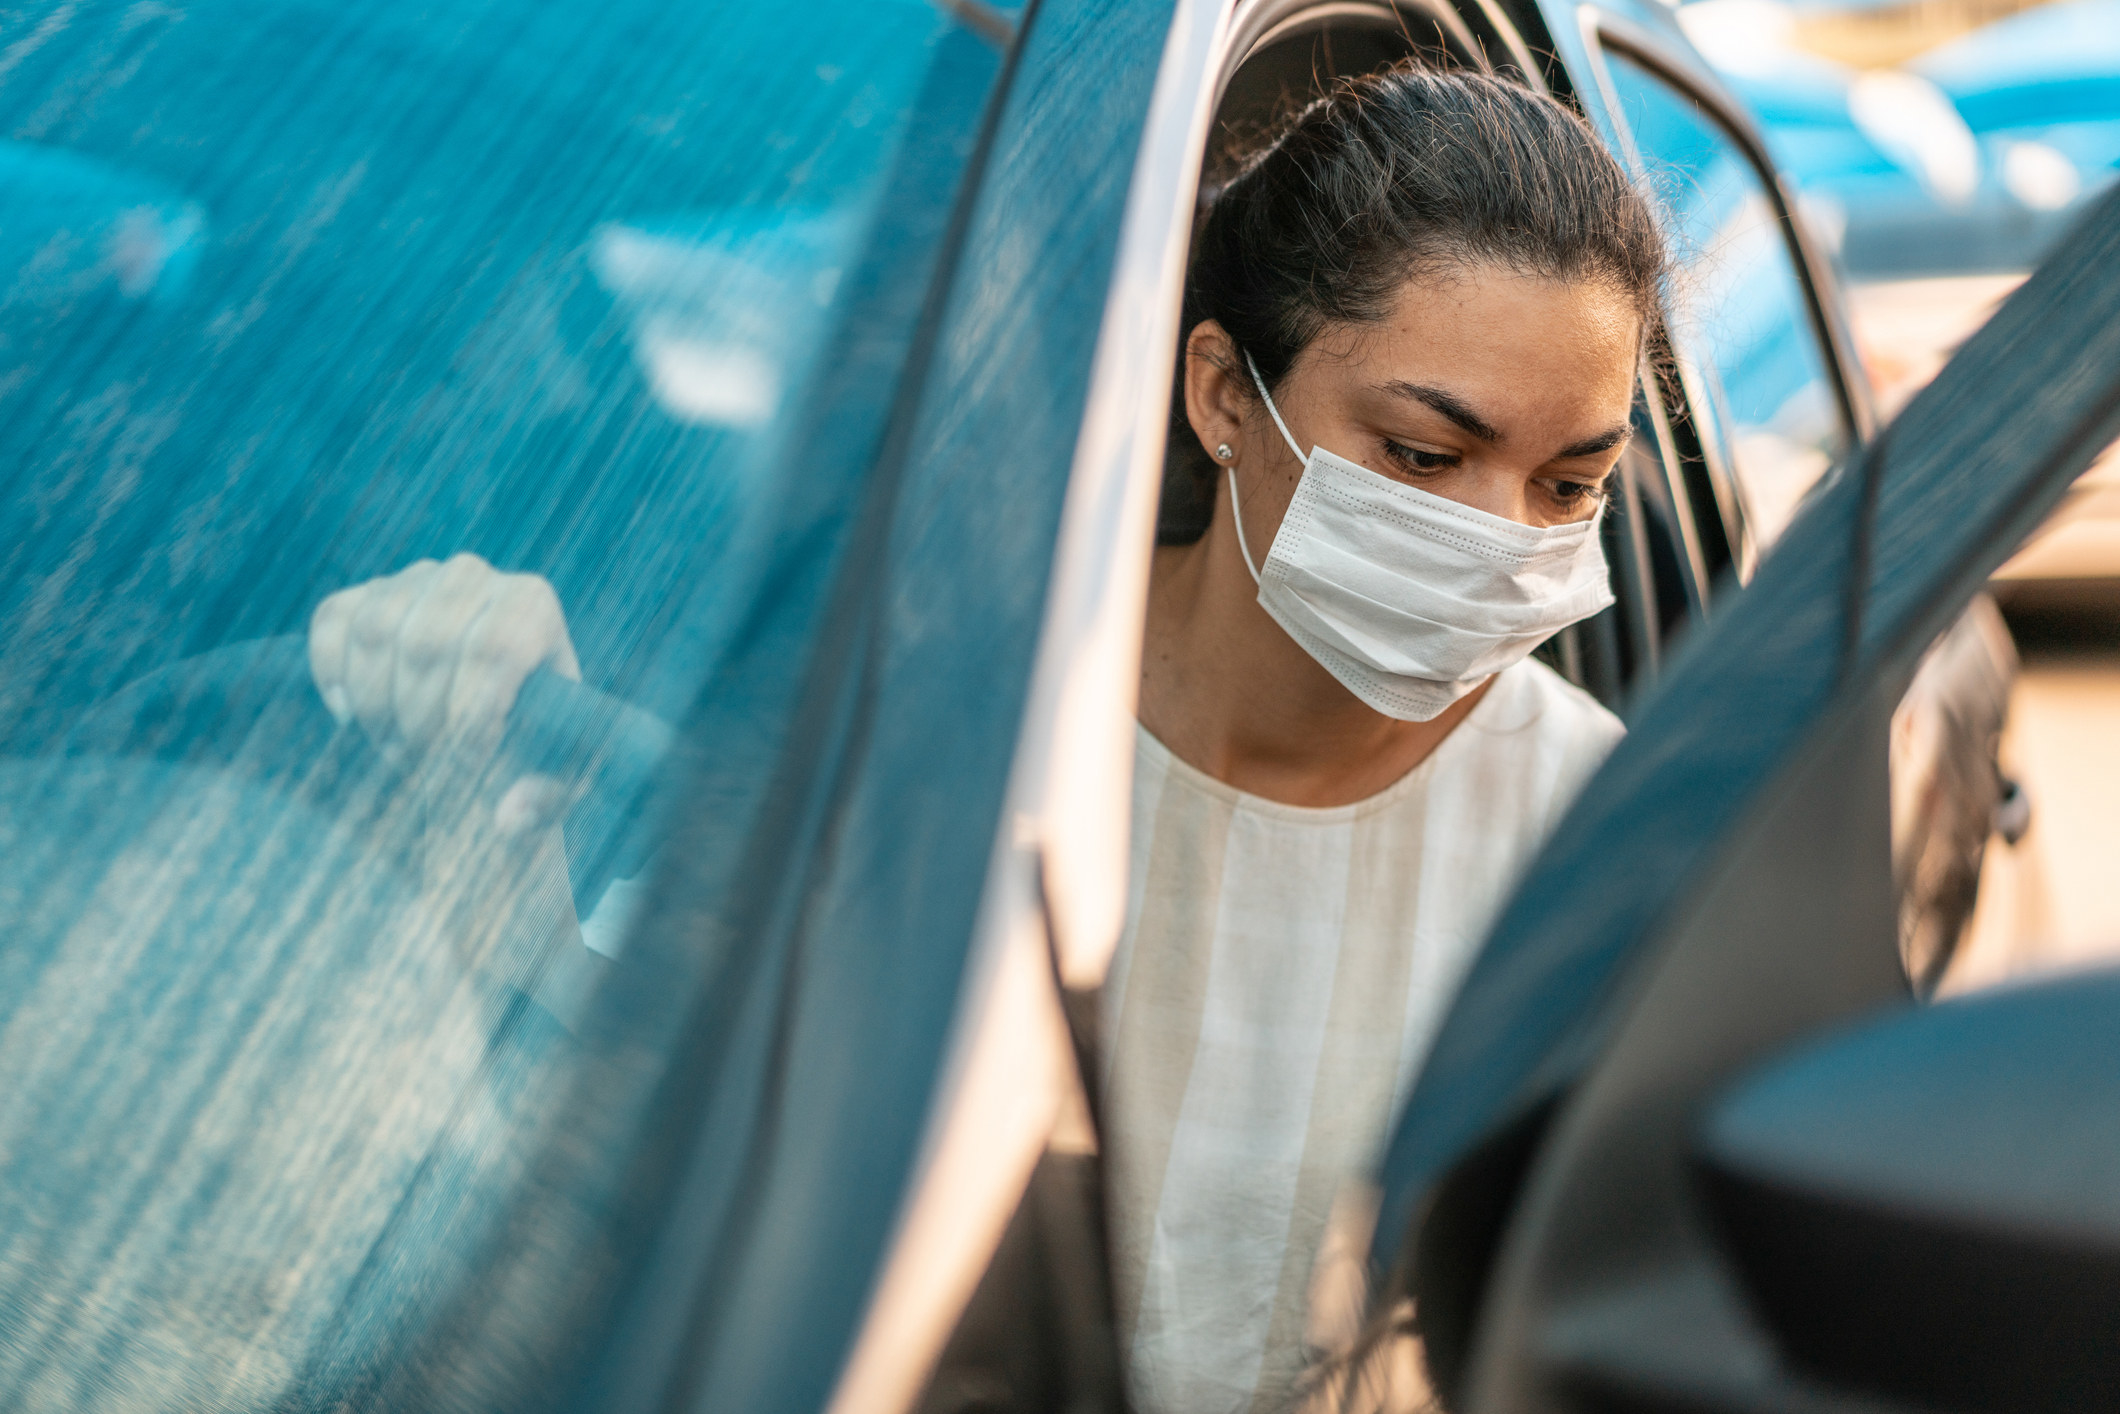 Woman wearing a surgical mask and emerging from a car